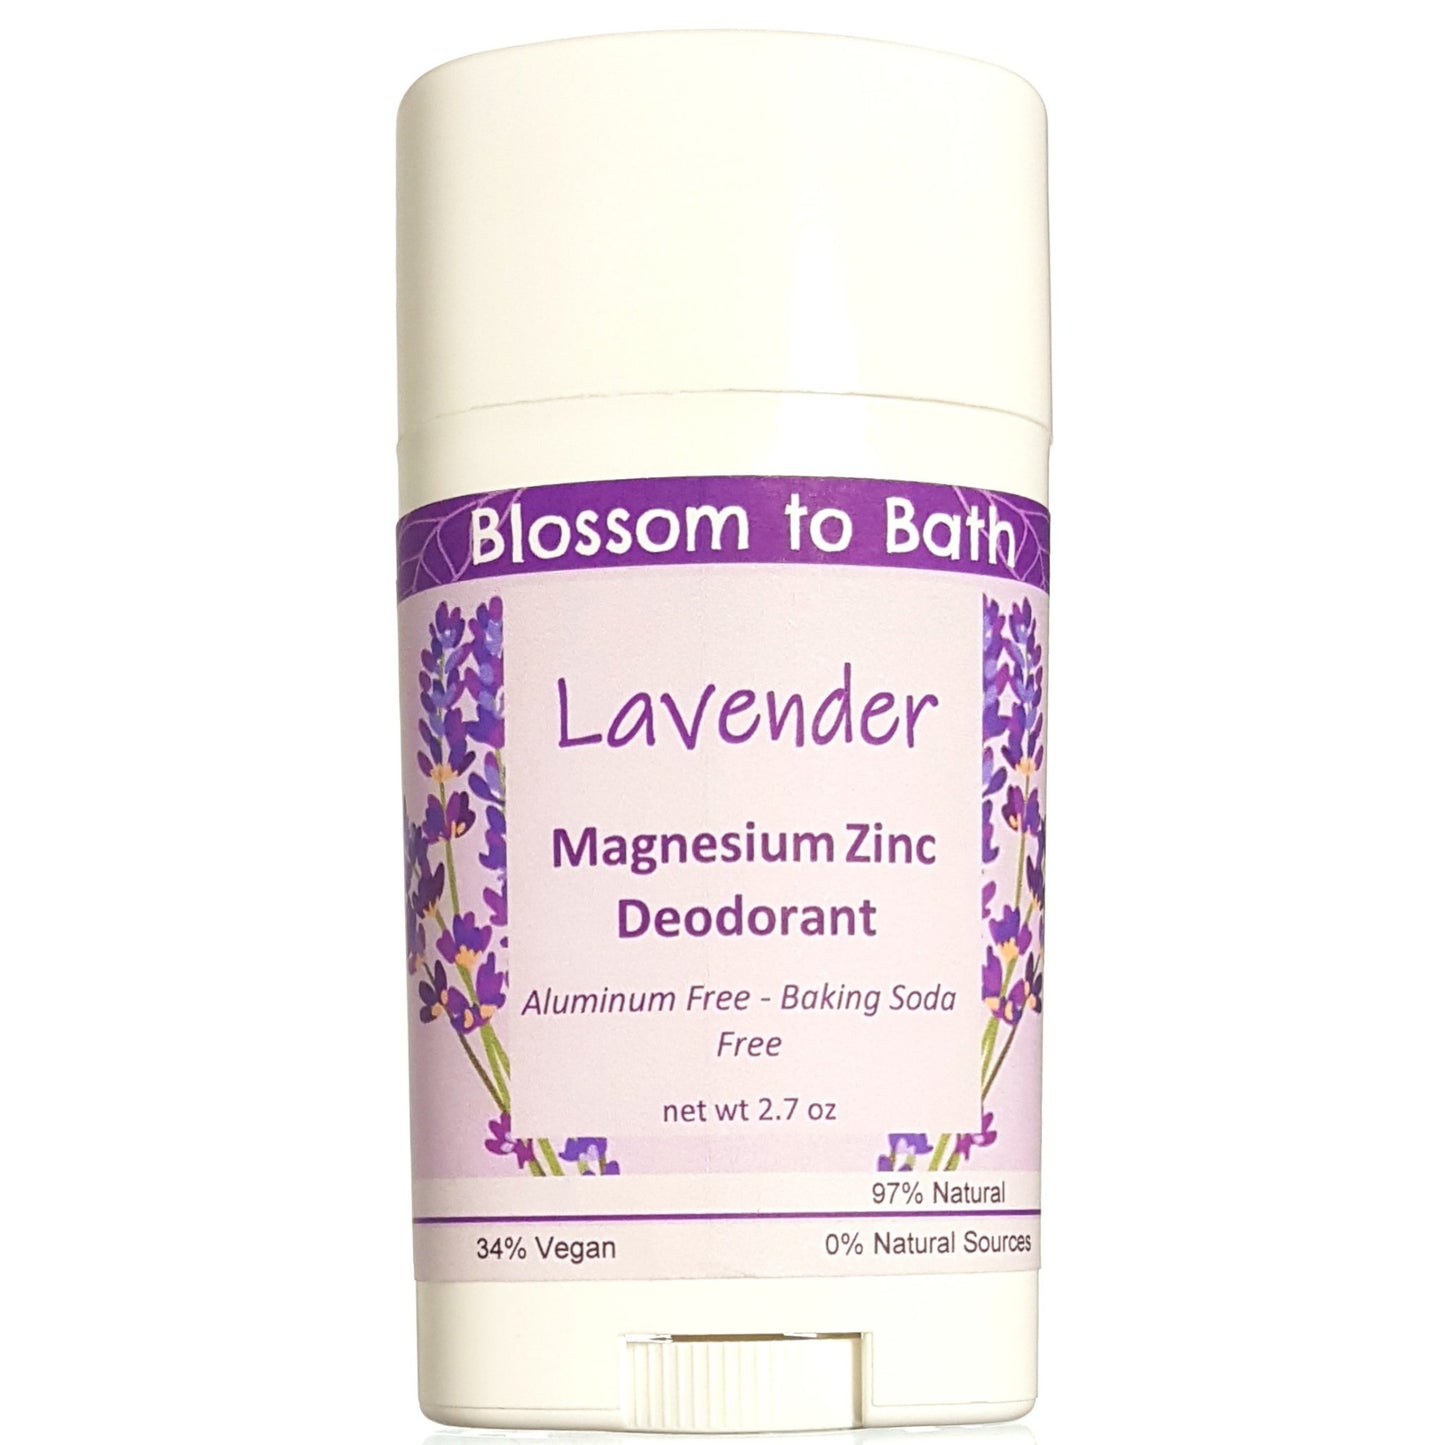 Buy Blossom to Bath Lavender Magnesium Zinc Deodorant from Flowersong Soap Studio.  Long lasting protection made from organic botanicals and butters, made without baking soda, tested in the Arizona heat  Classic lavender scent that is relaxing and comforting.